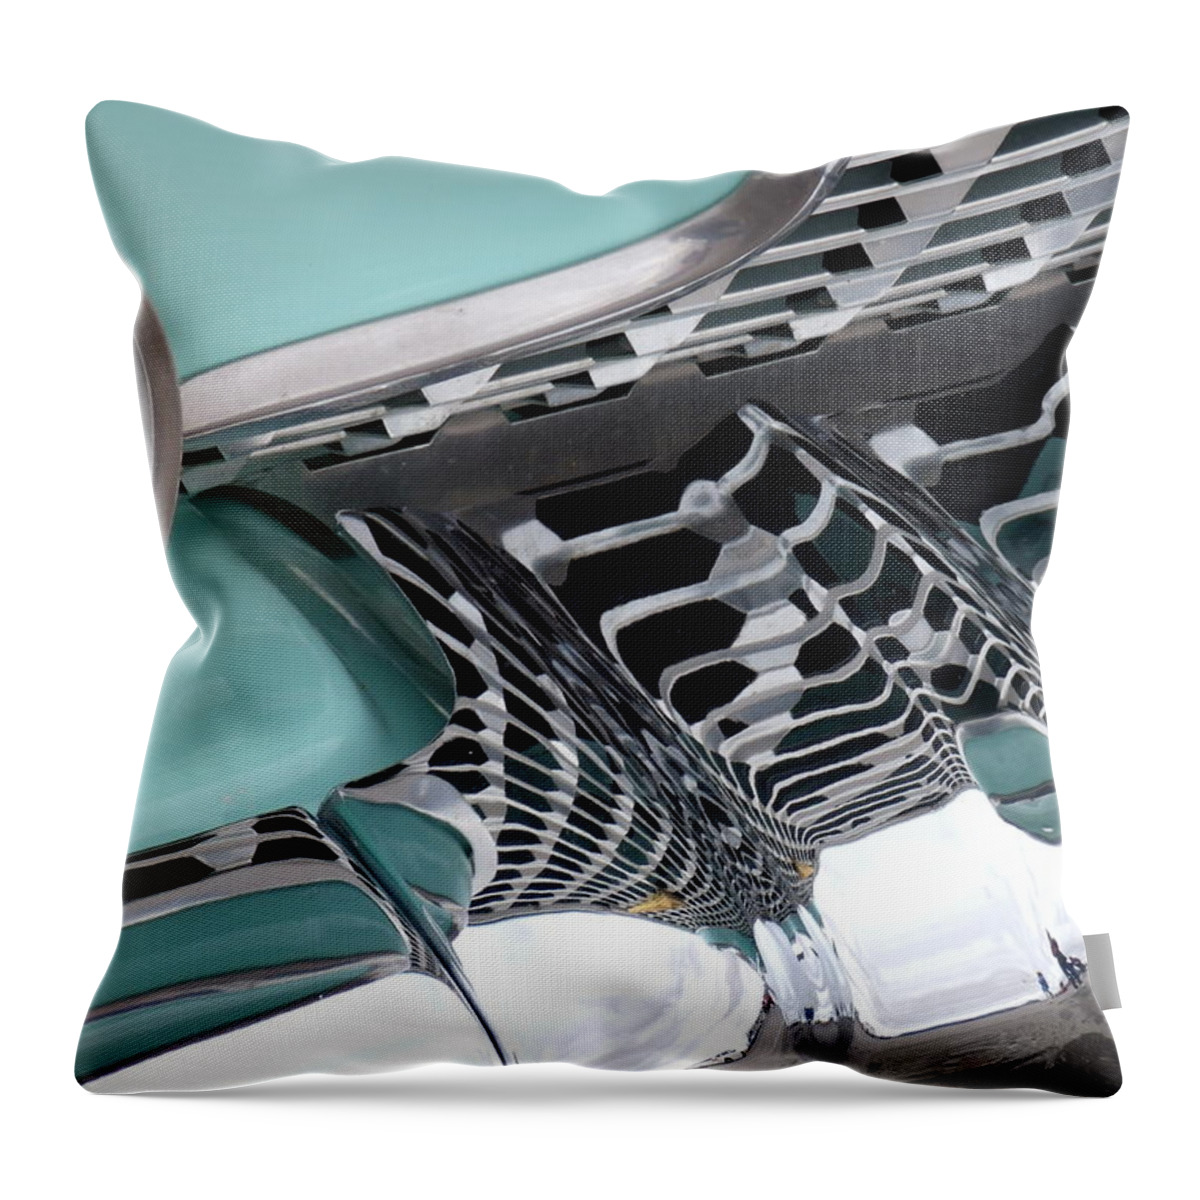 David S Reynolds Throw Pillow featuring the photograph Chrome by David S Reynolds